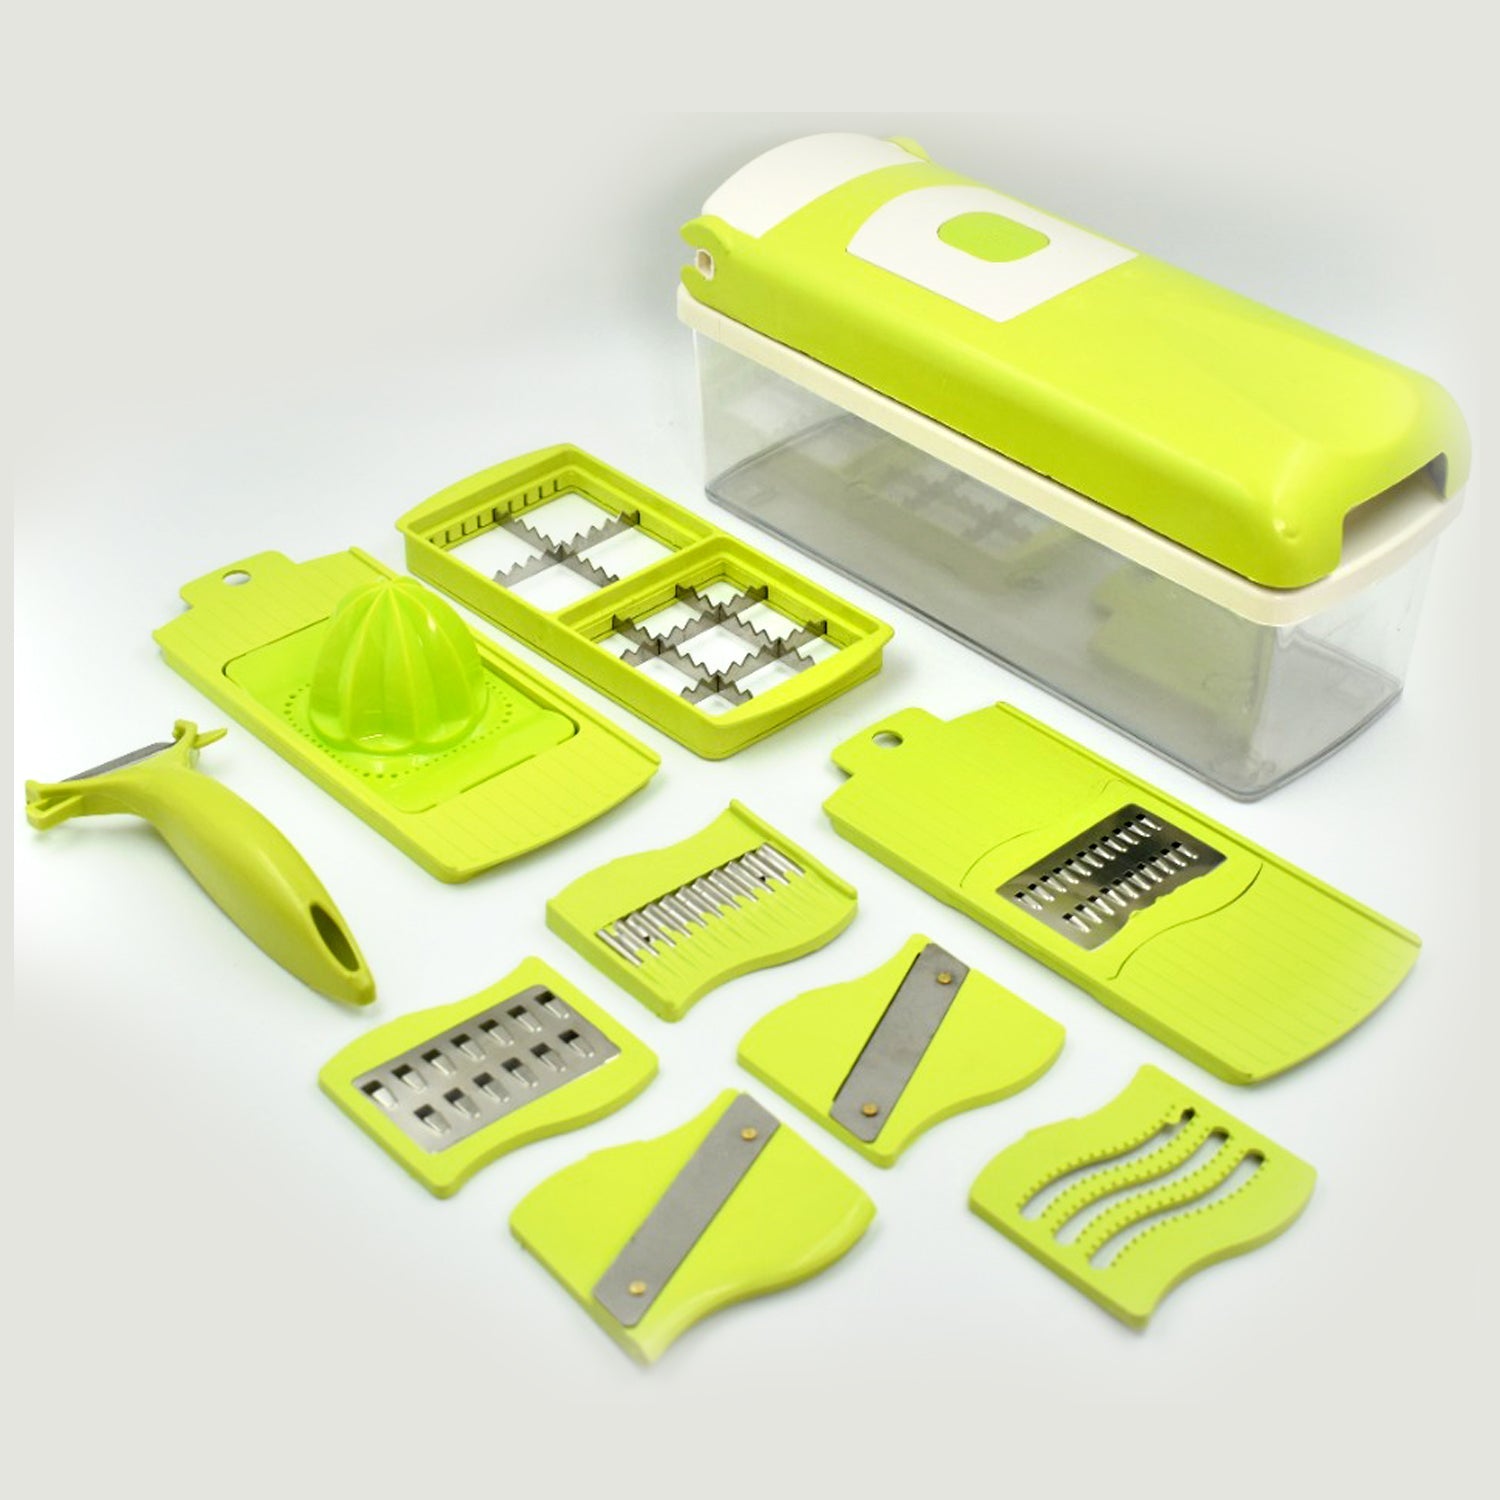 2387 Nicer Dicer 12 in 1 Used For Chopping And Cutting Of Vegetables And Fruits.